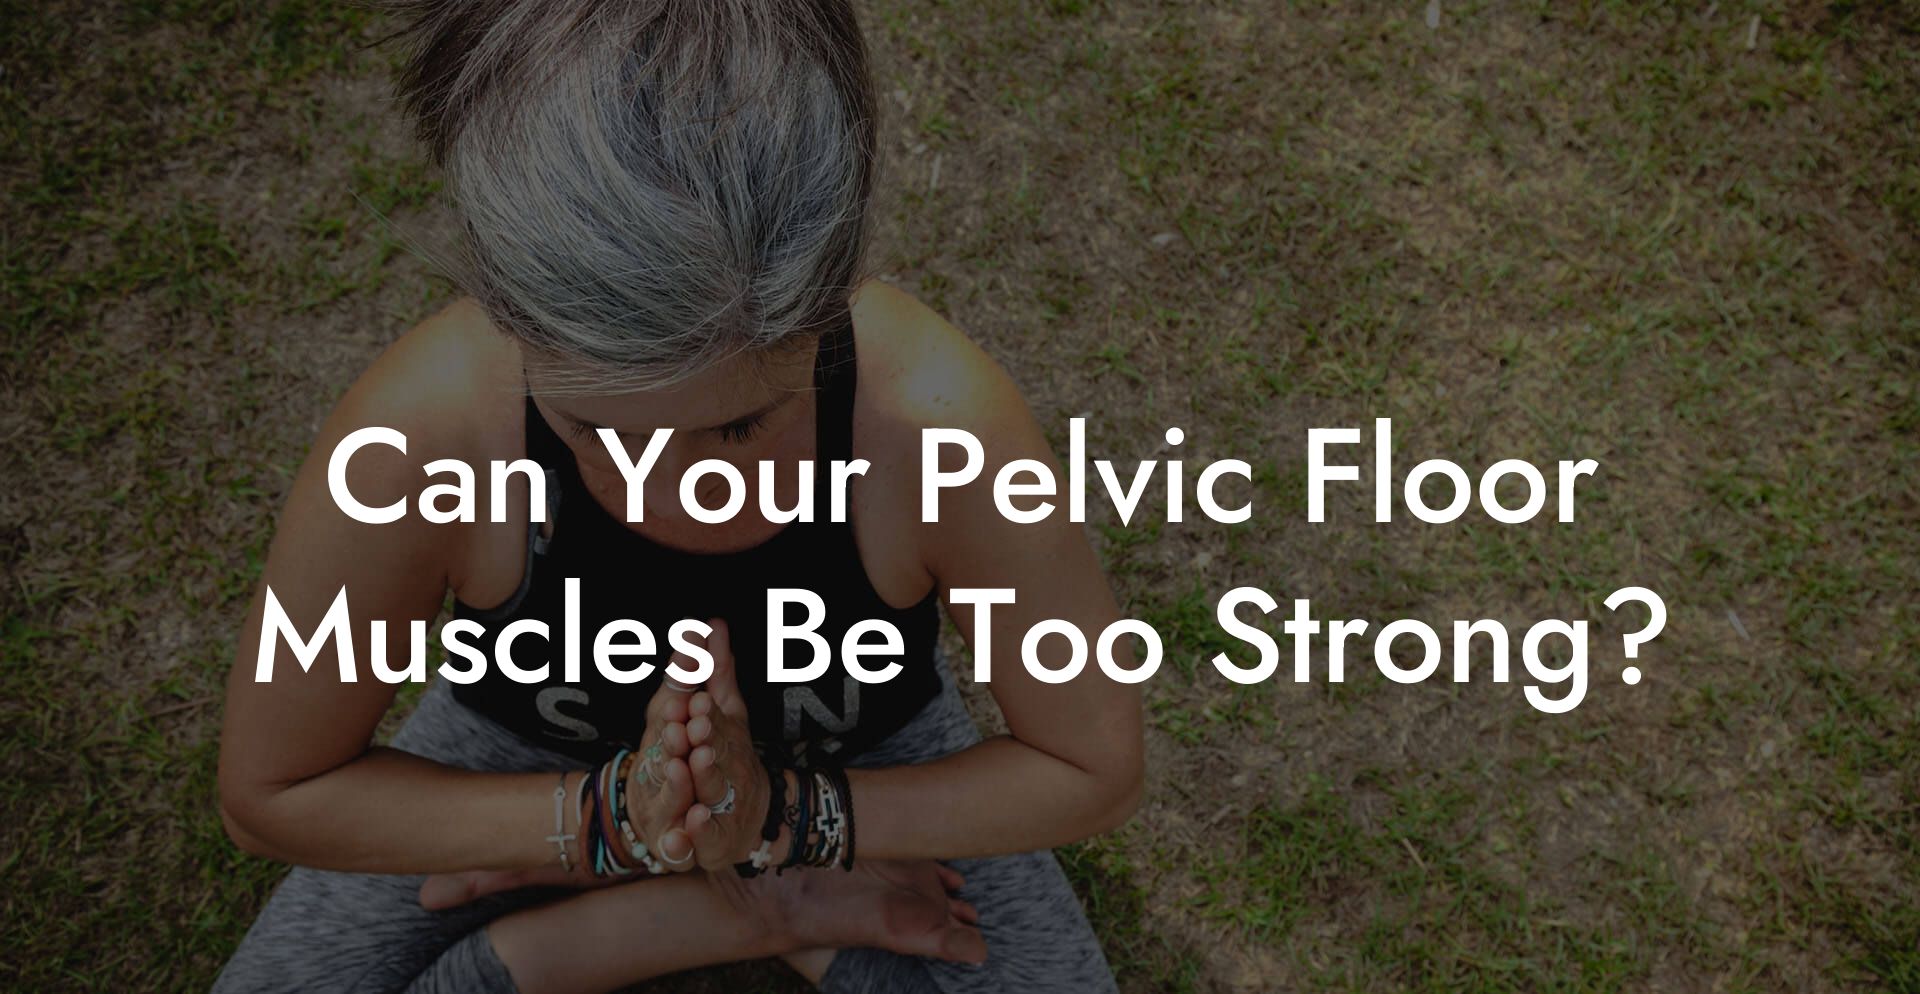 Can Your Pelvic Floor Muscles Be Too Strong?